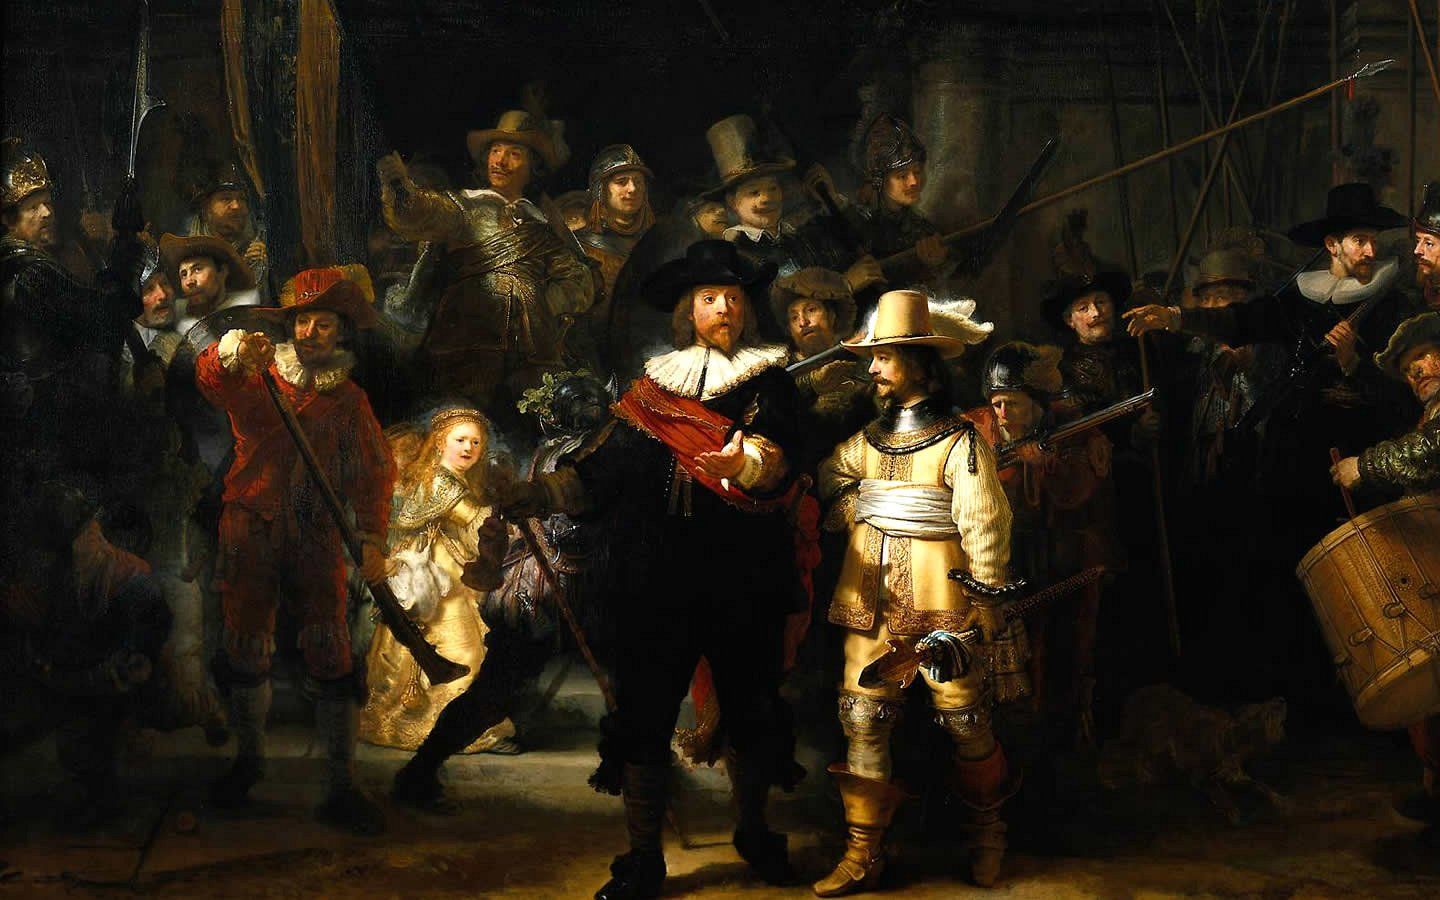 1440x900 Wallpaper Rembrandt The Night Watch 1440 X 900 Famous Painting